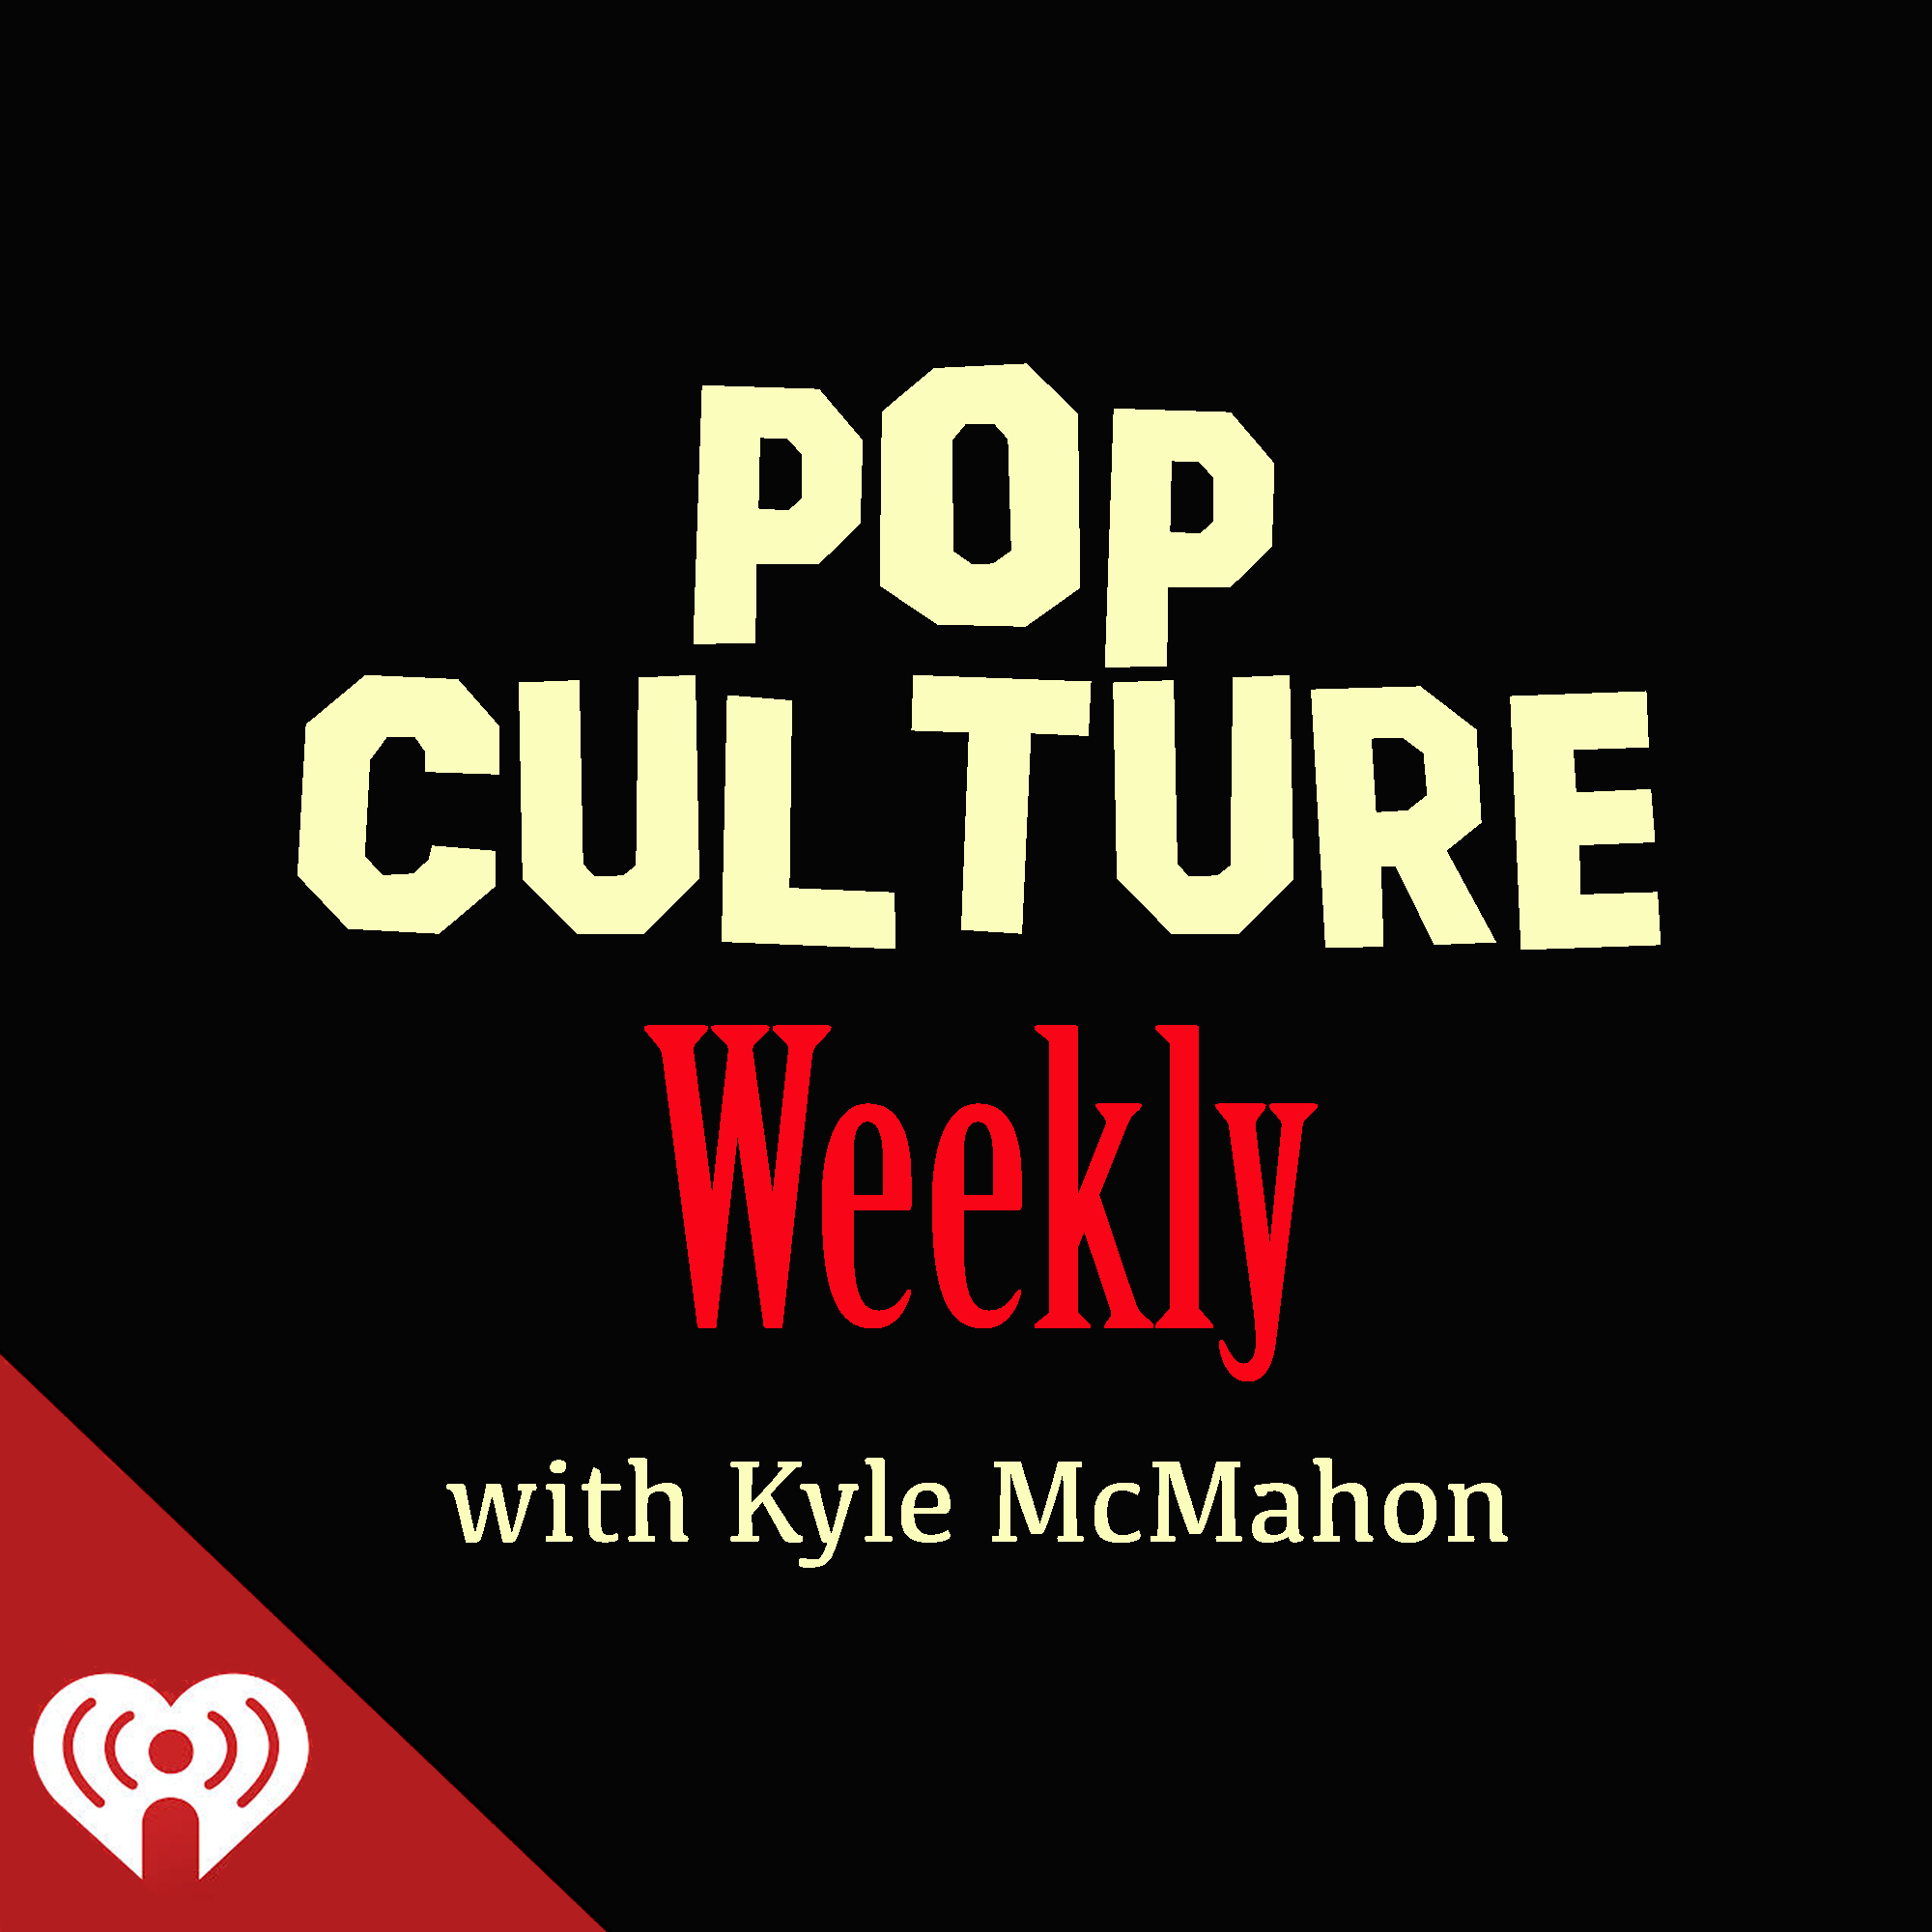 Pop Culture Weekly with Kyle Mcmahon presented by iHeart Radio